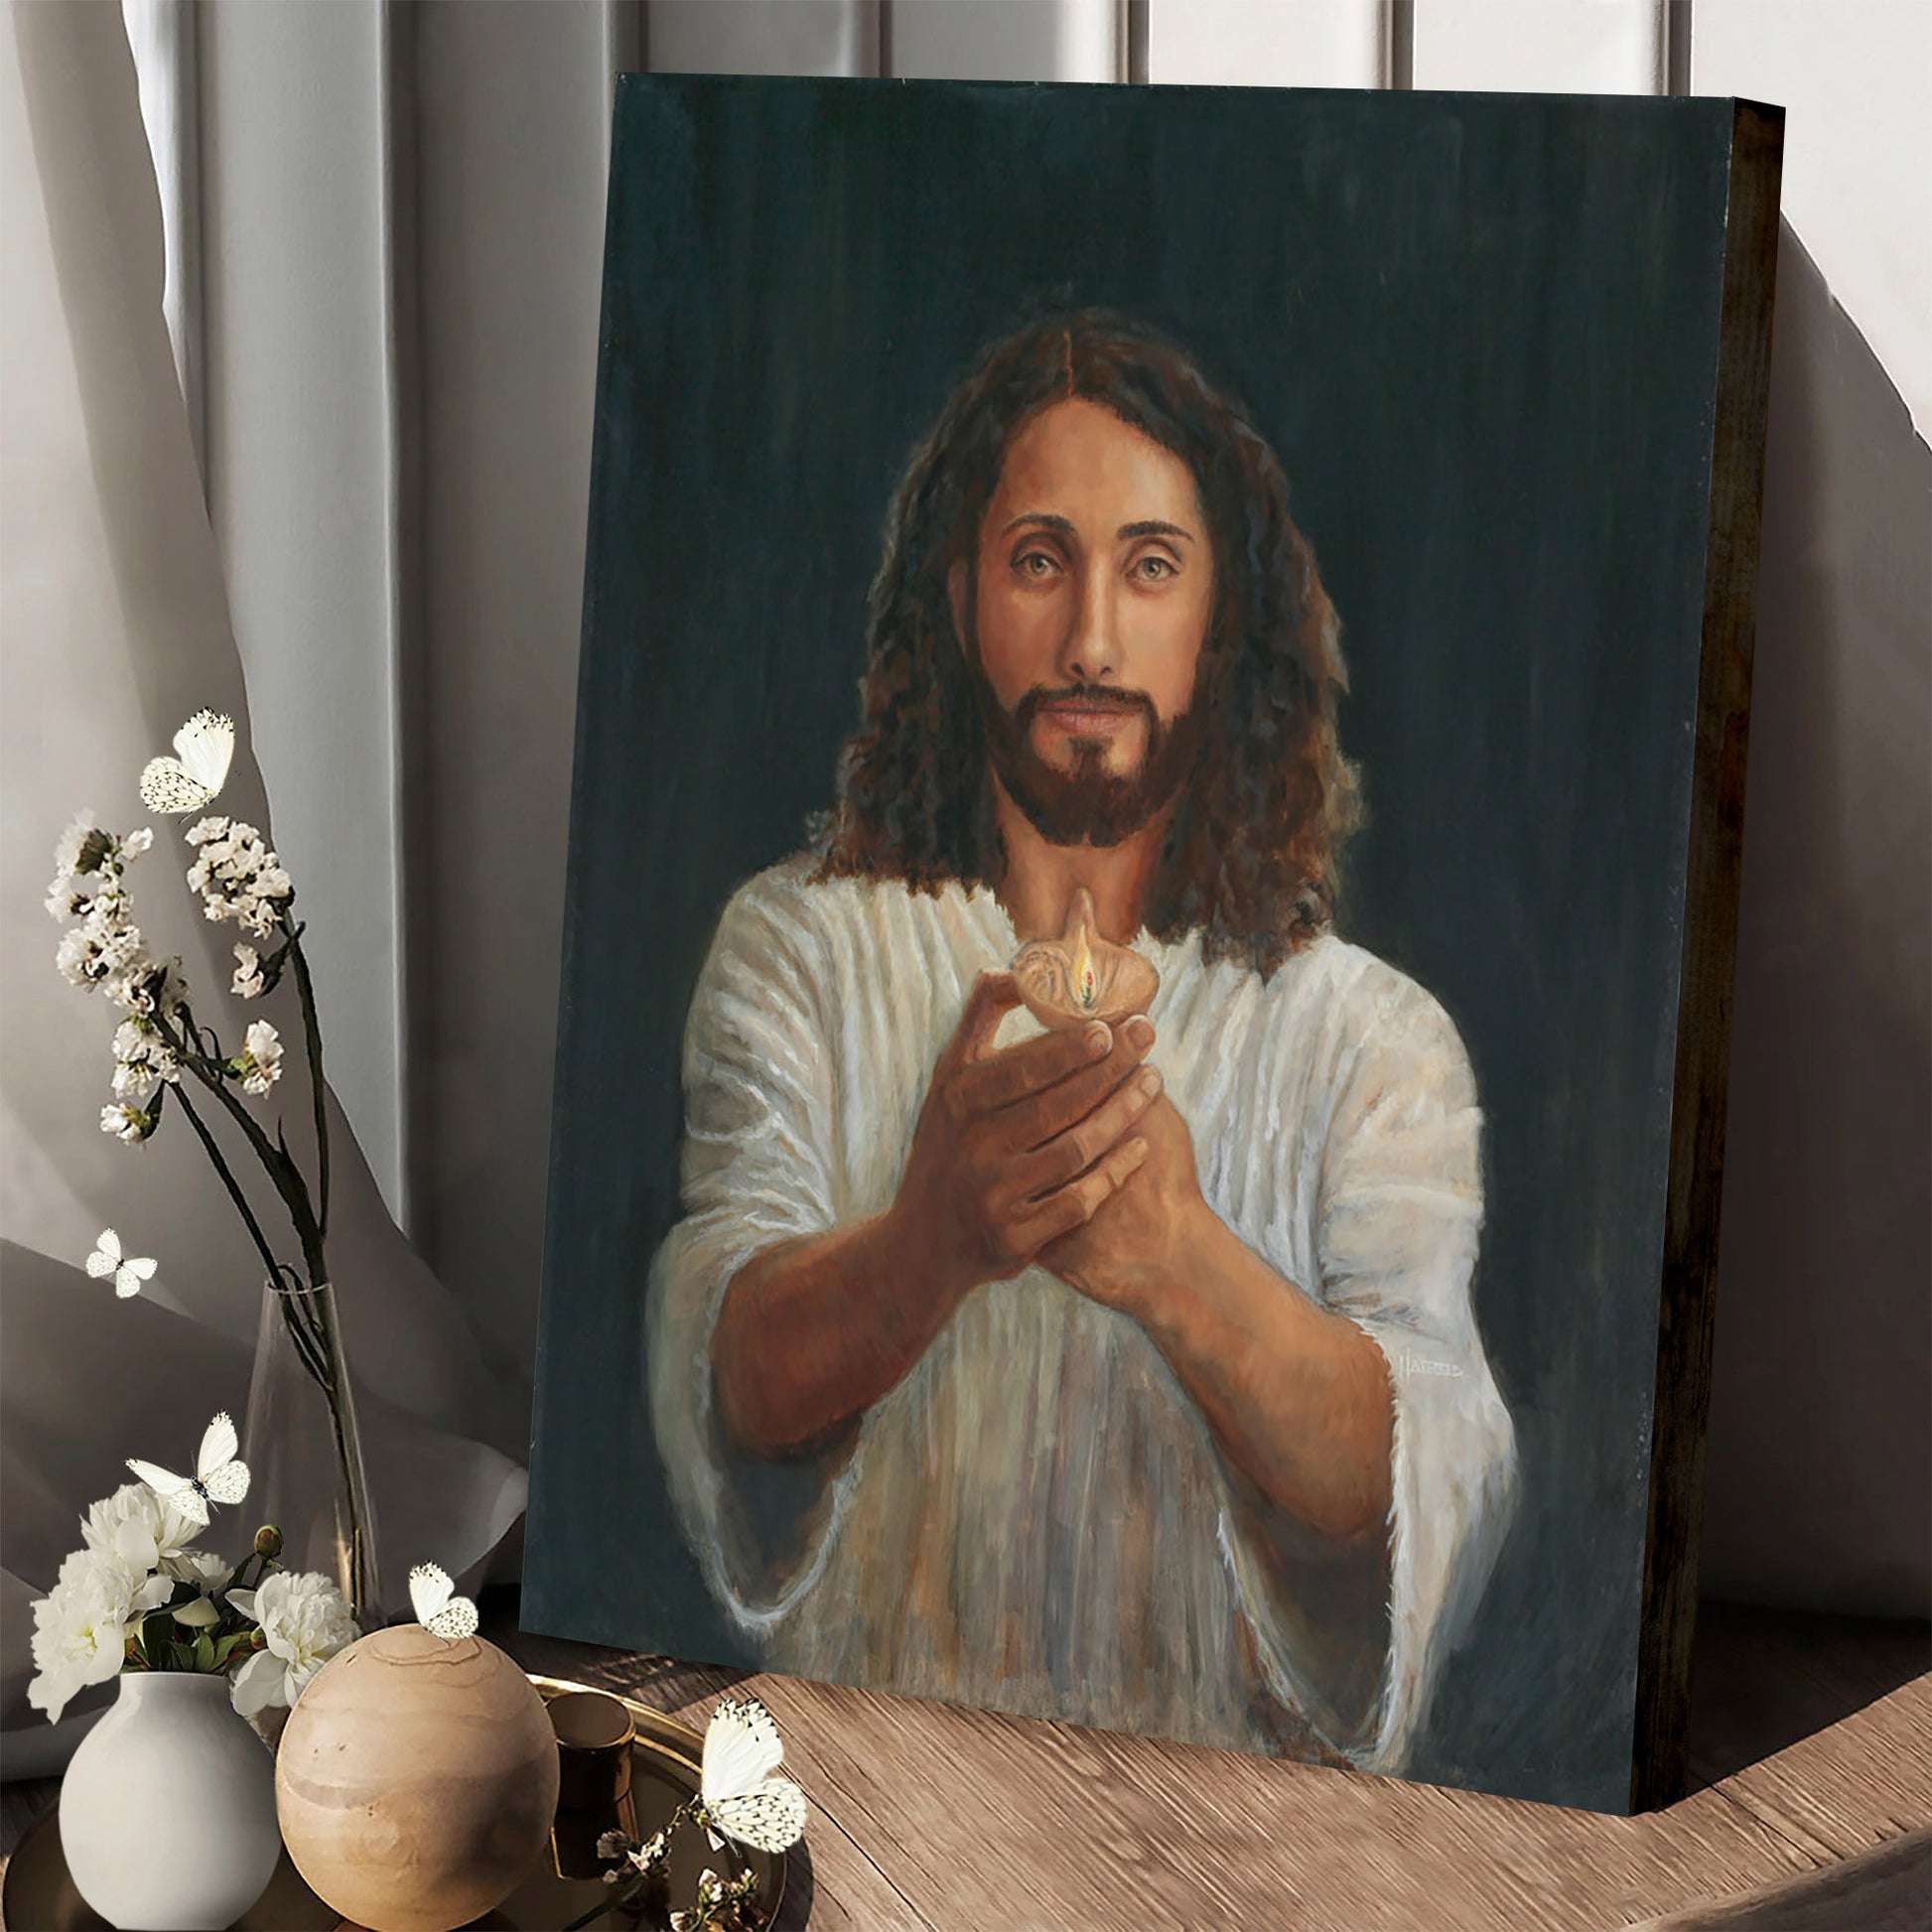 The Bridegroom Canvas Picture - Jesus Christ Canvas Art - Christian Wall Canvas